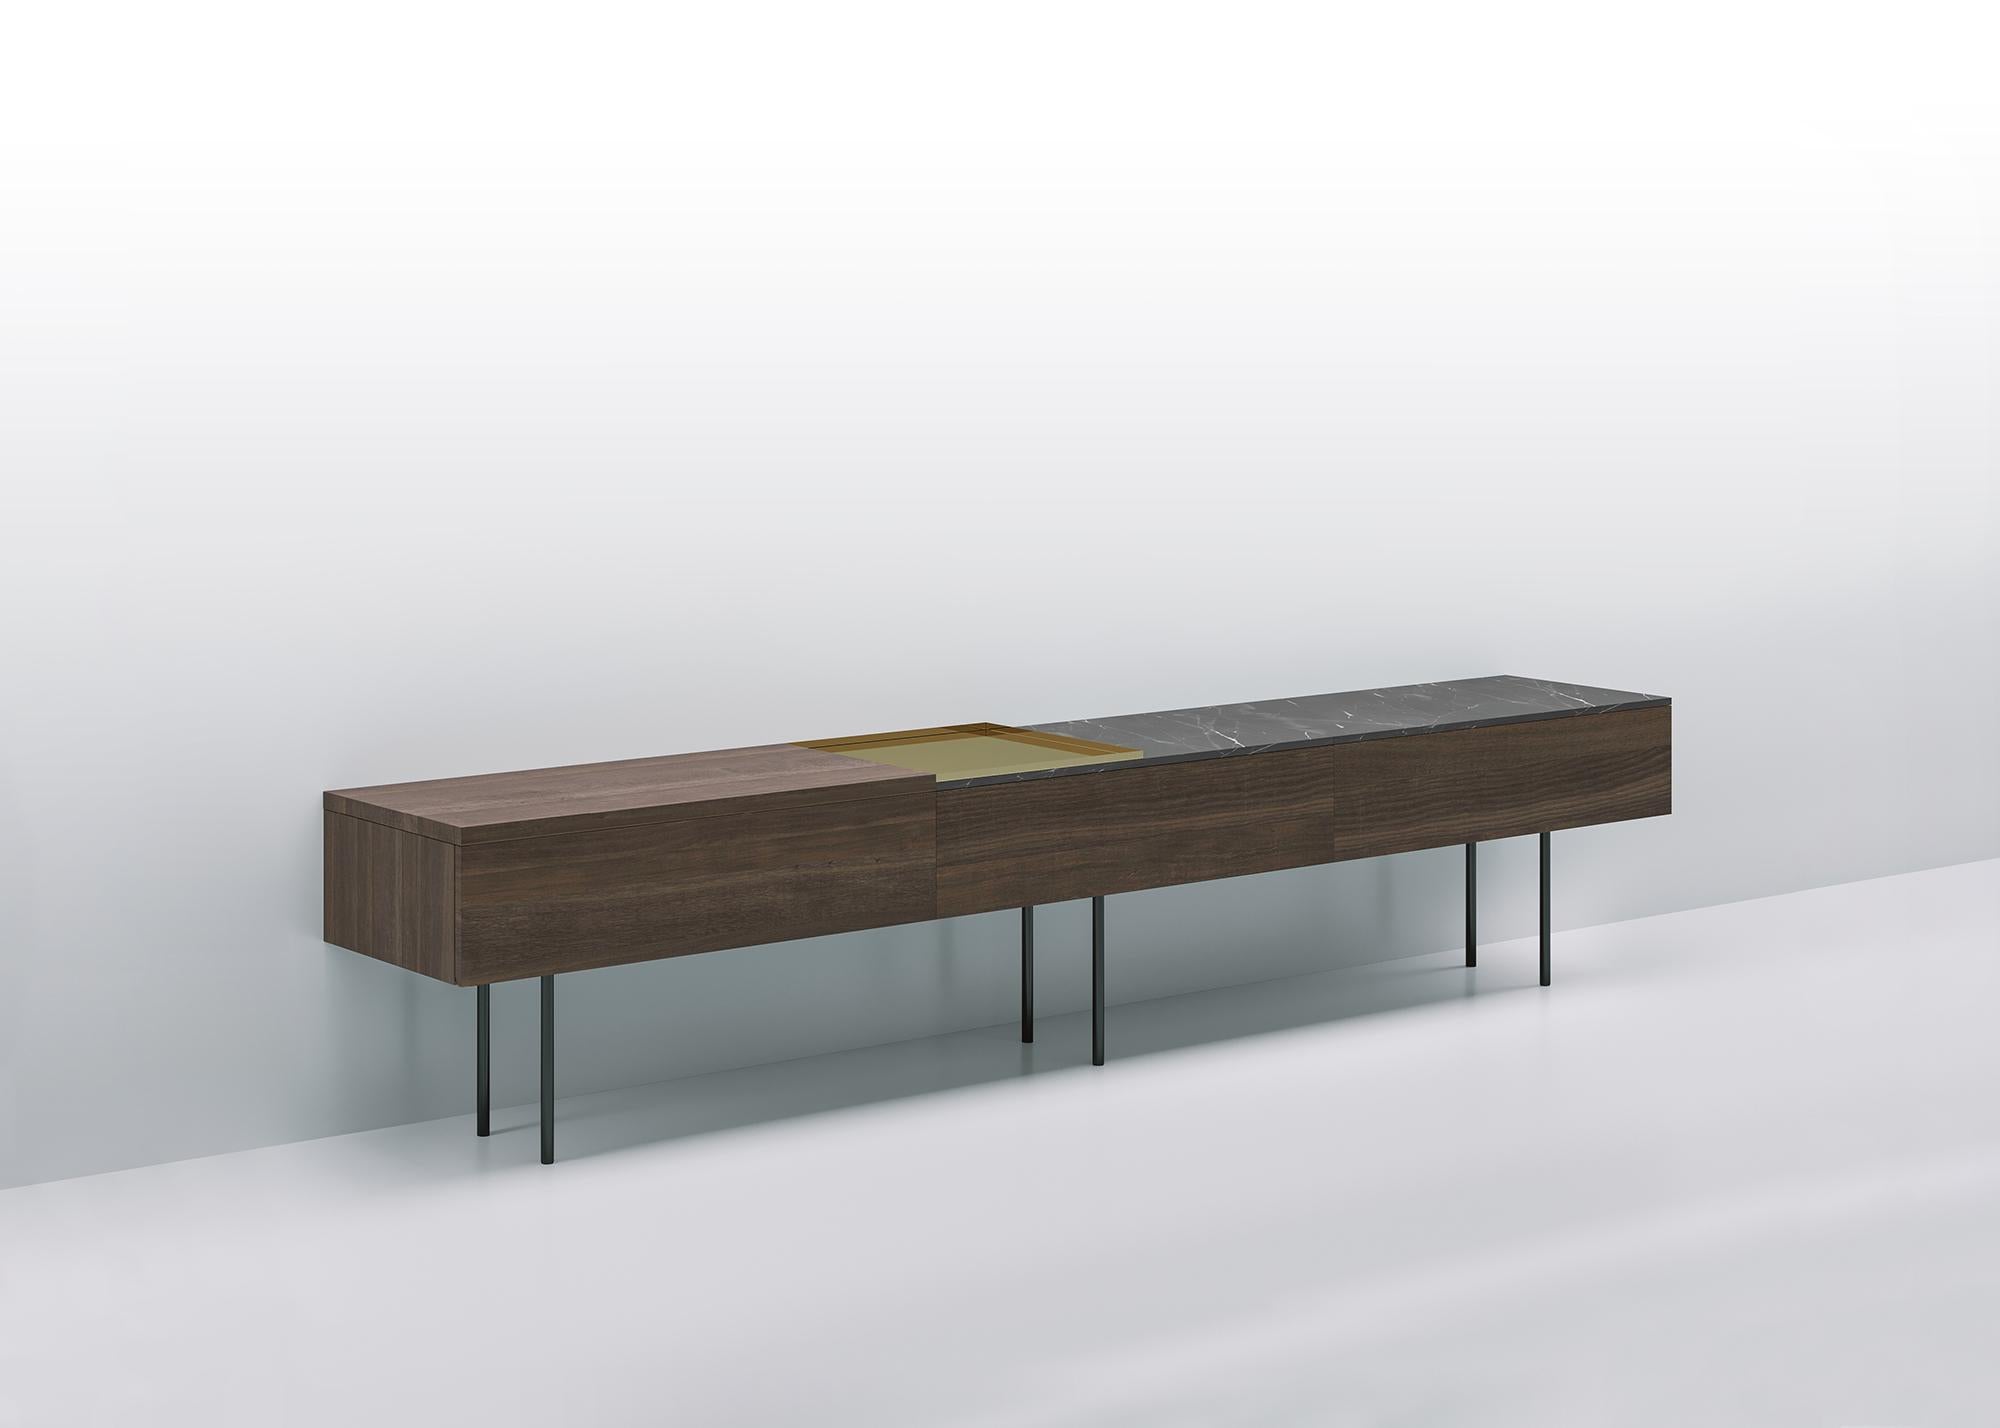 Low modular console resting on a structure of volumes and shelves in different contrasting materials: wood, marble, shiny metals, giving life to compositions in which full and empty volumes and materials differing by type, color nuances, texture and